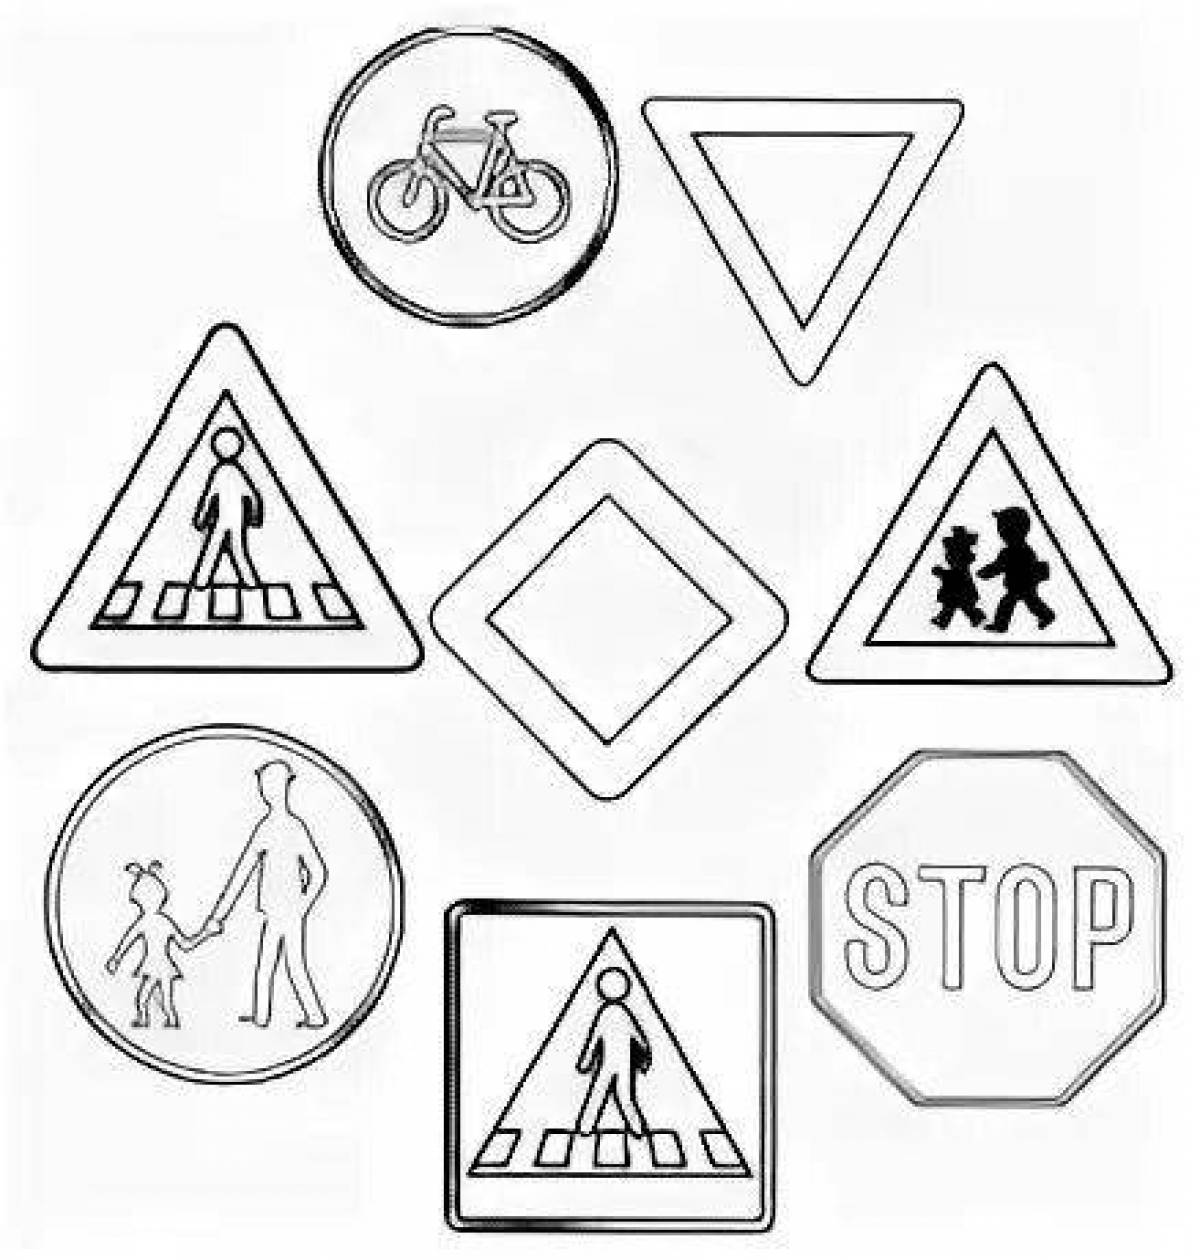 Traffic signs for children 6 7 years old #7